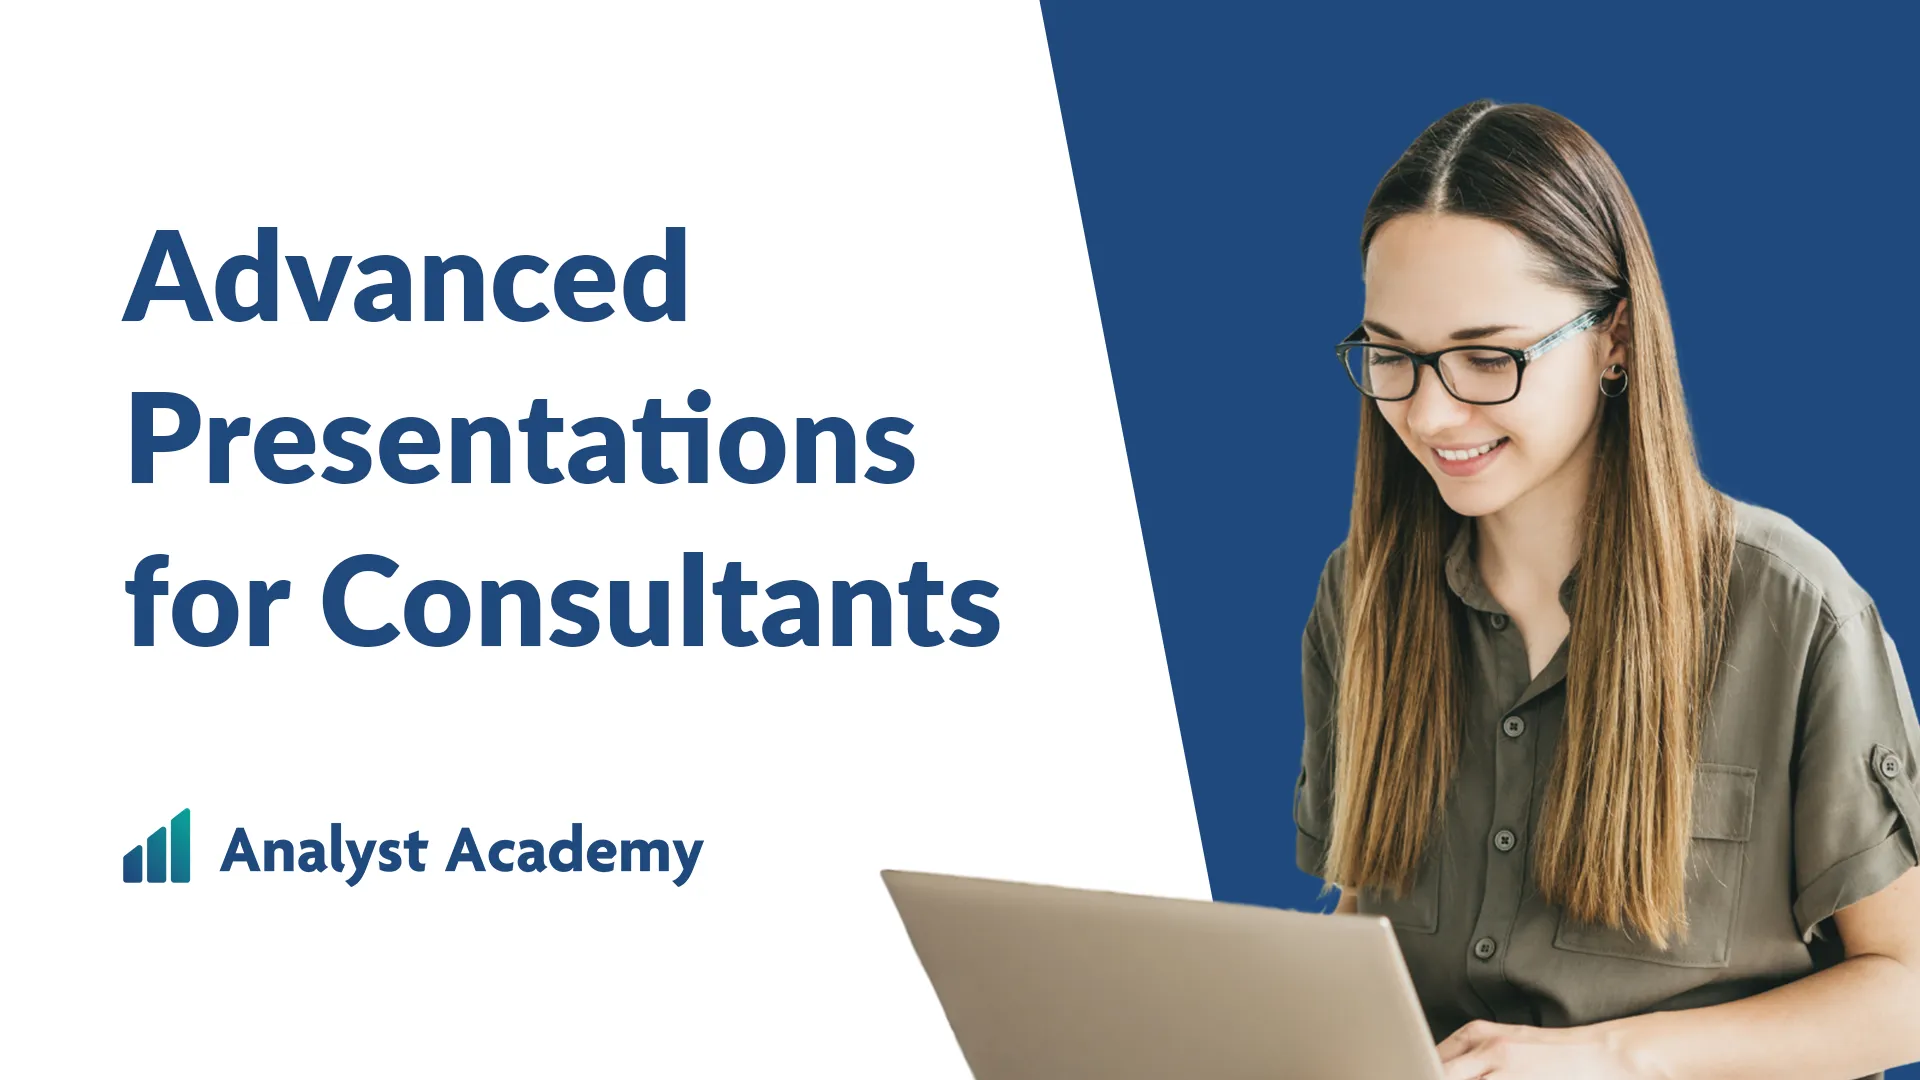 Consultant taking Advanced Presentations for Consultants course